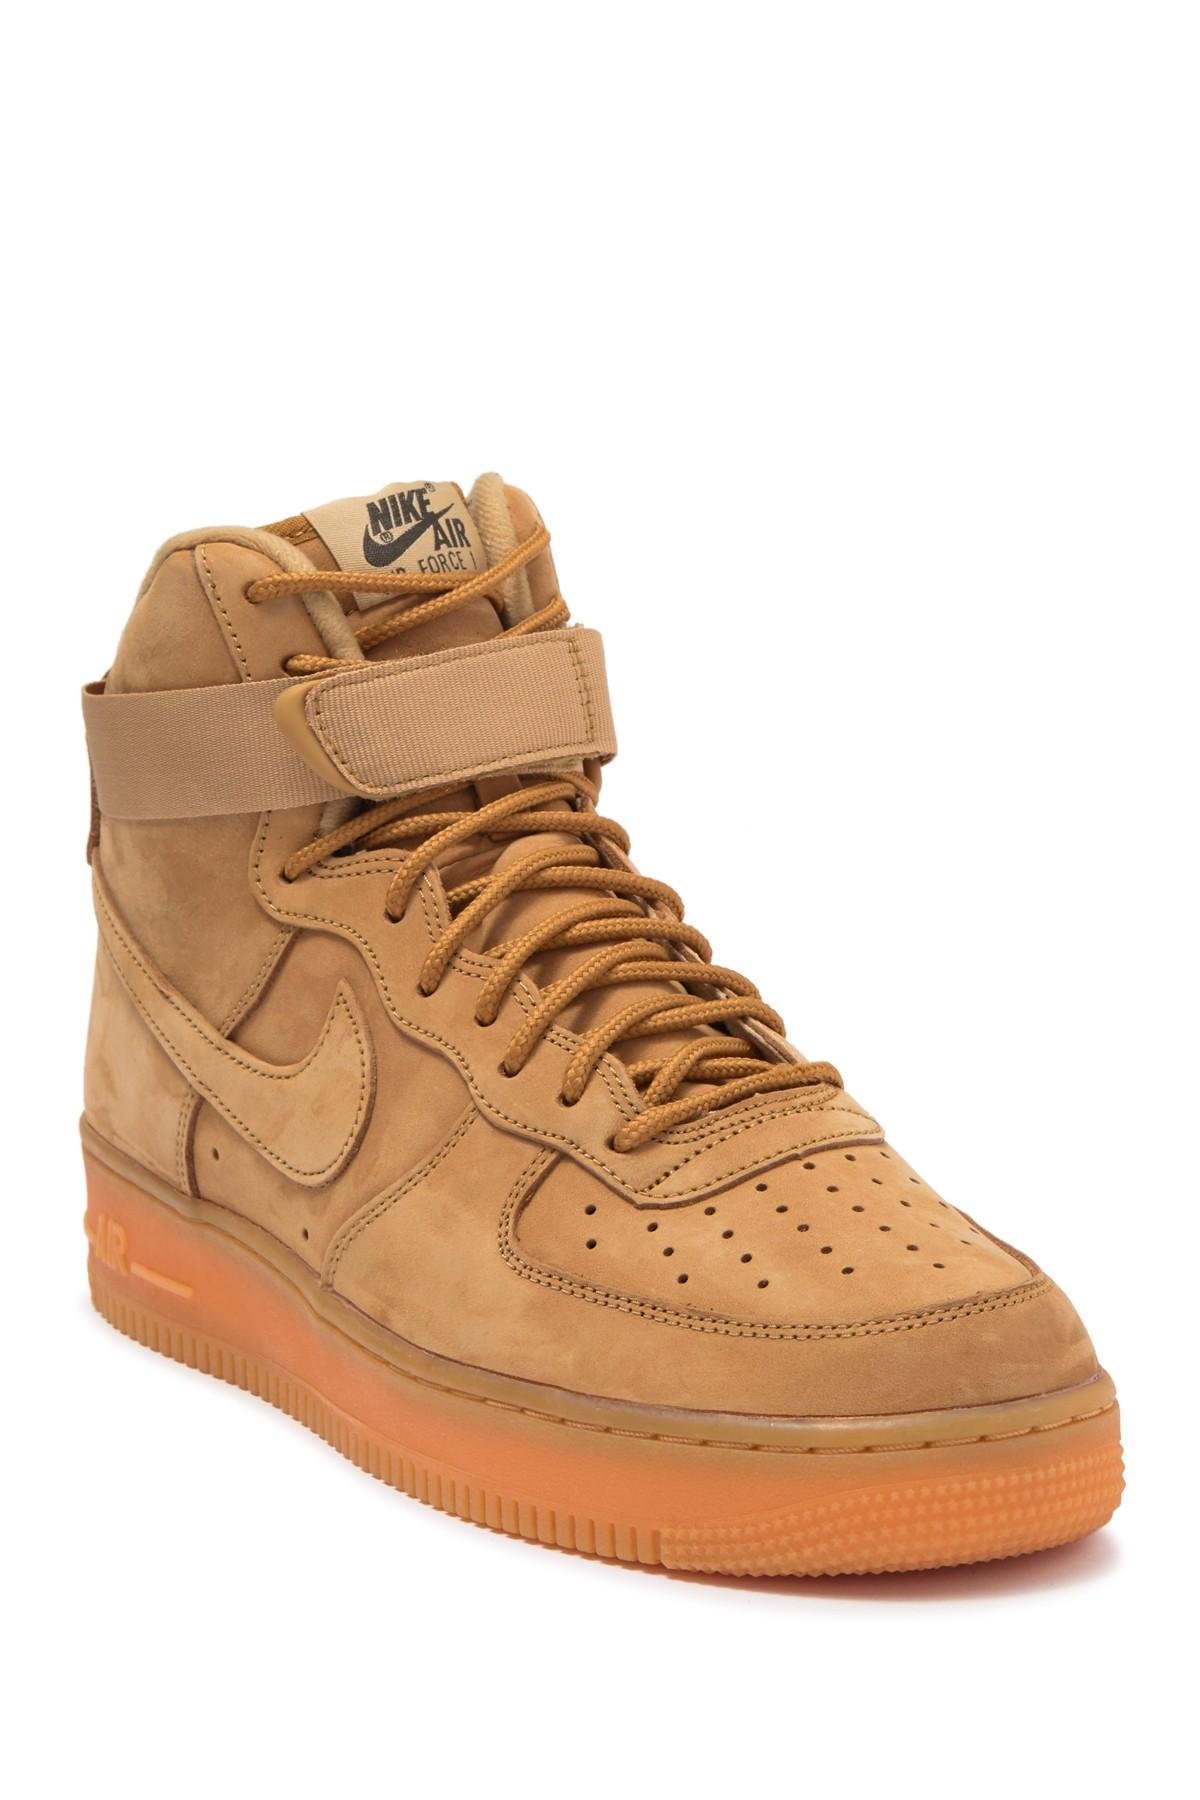 nike air force one camel